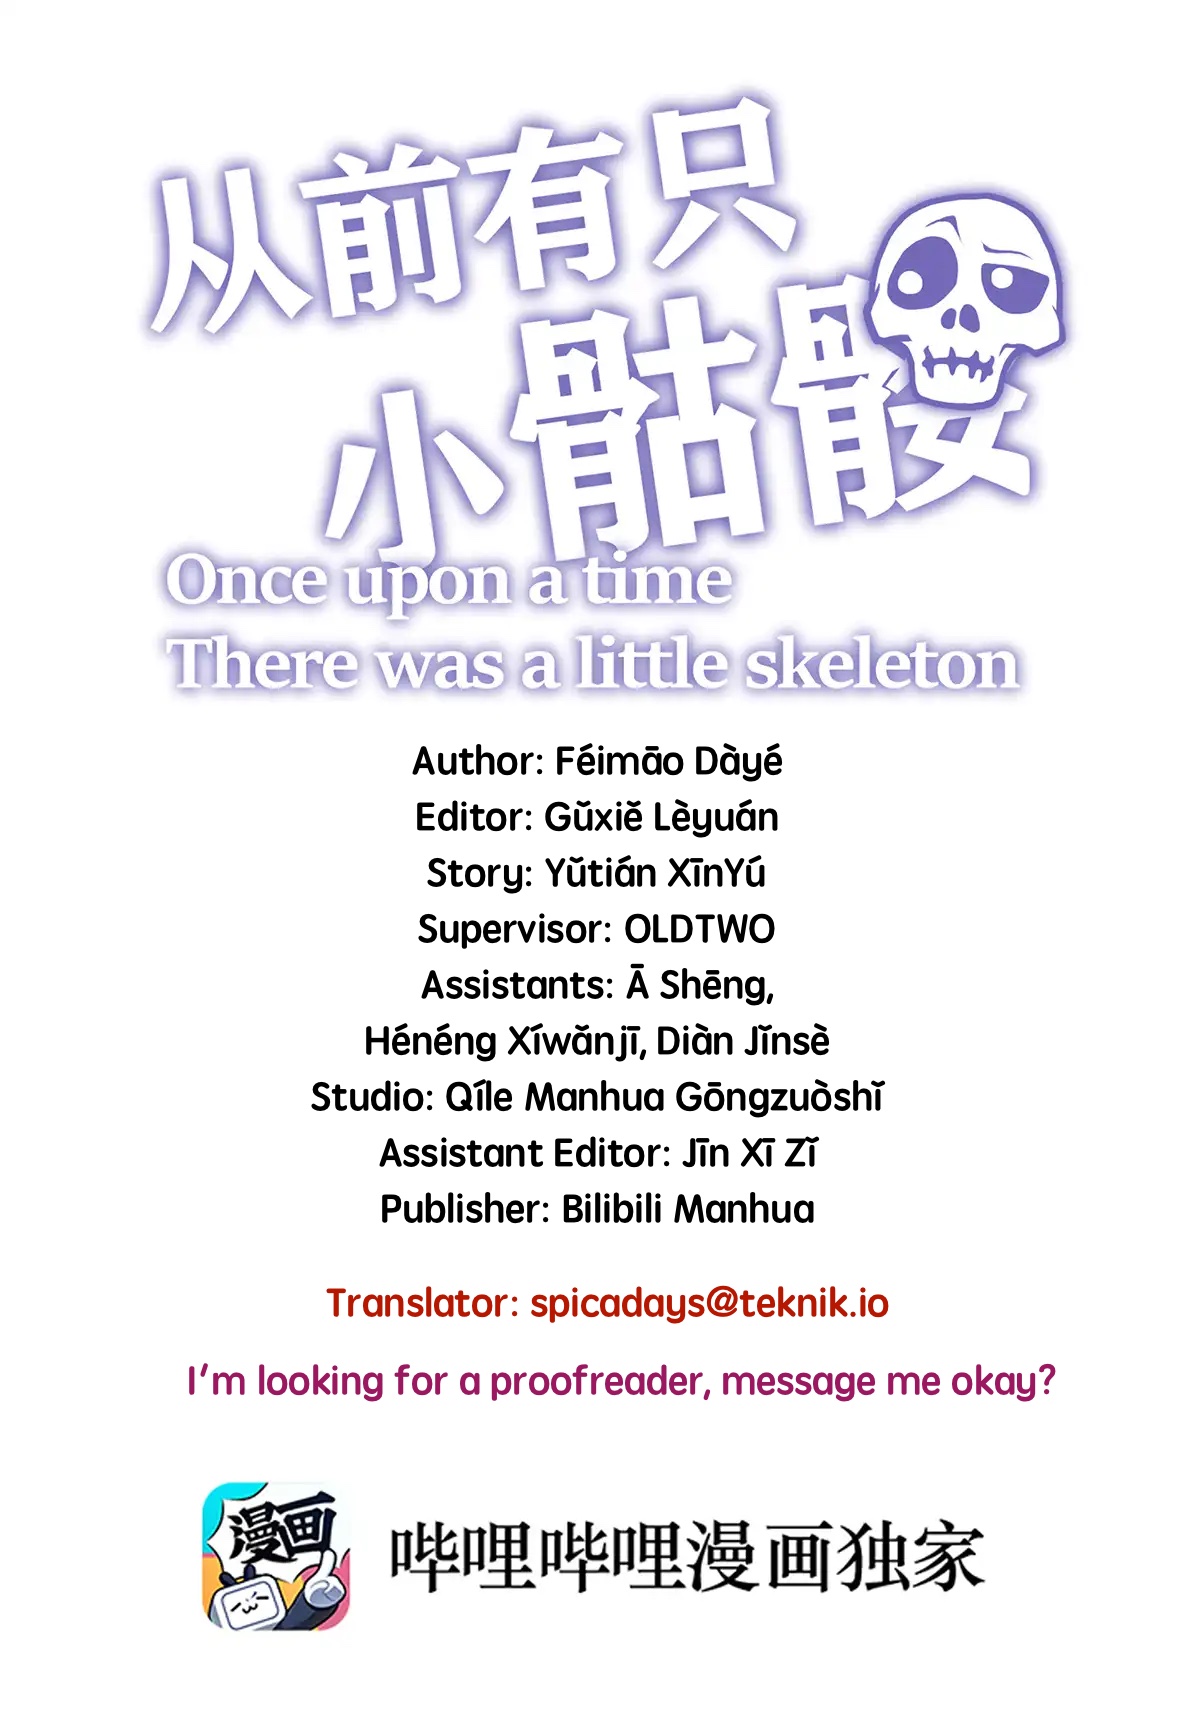 Little Skeleton Ch. 18 What's trying to come out?